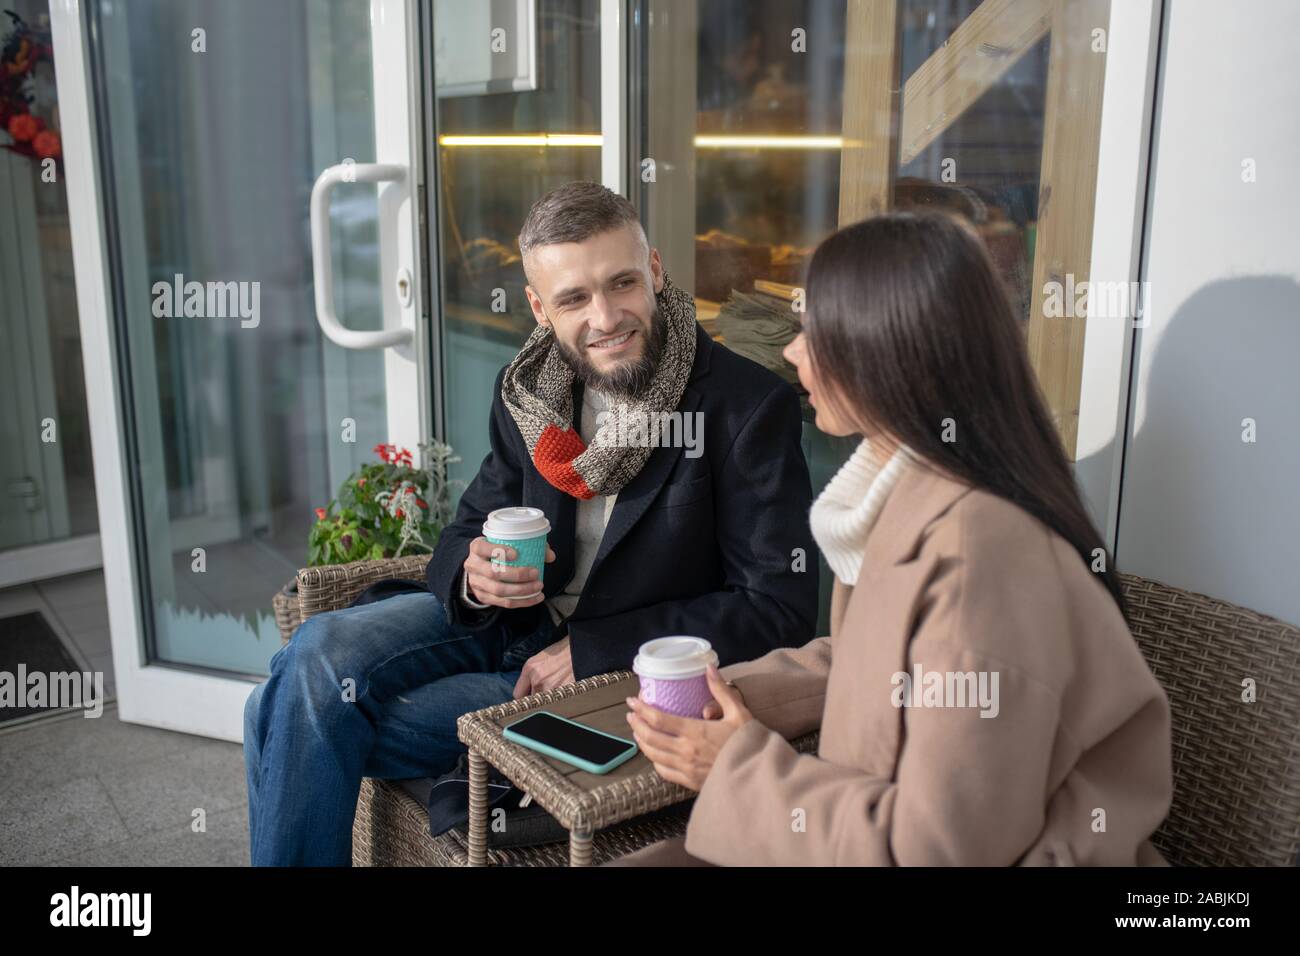 Pleasant young people talking to each other Stock Photo